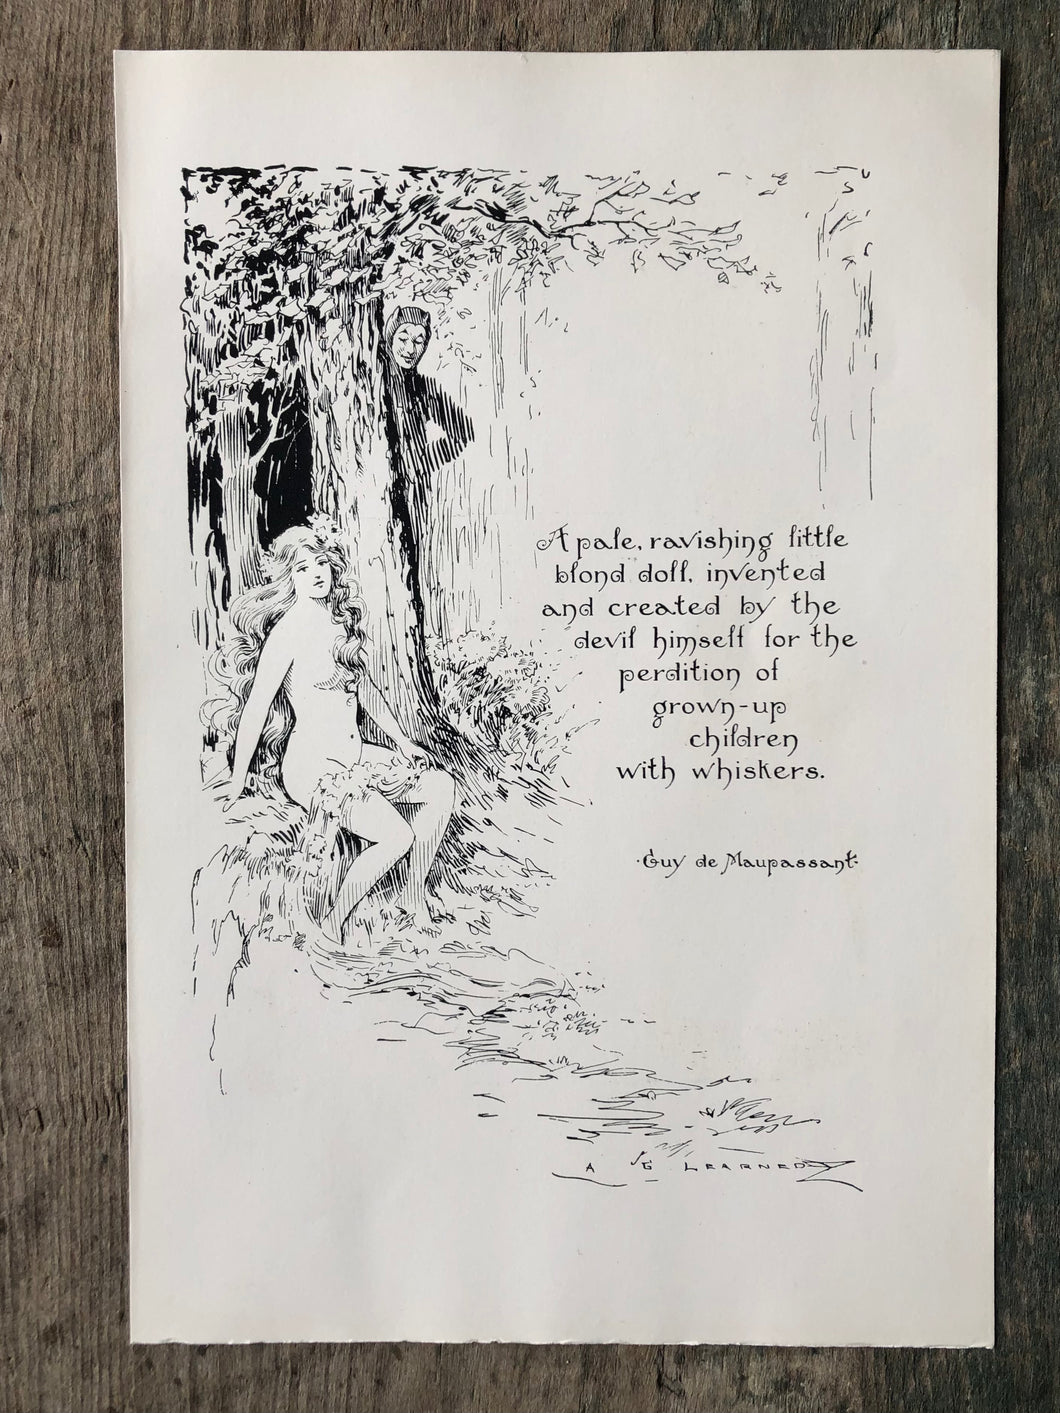 Guy de Maupassant Quote Print illustrated by Arthur G. Learned from “Eve’s Daughter”